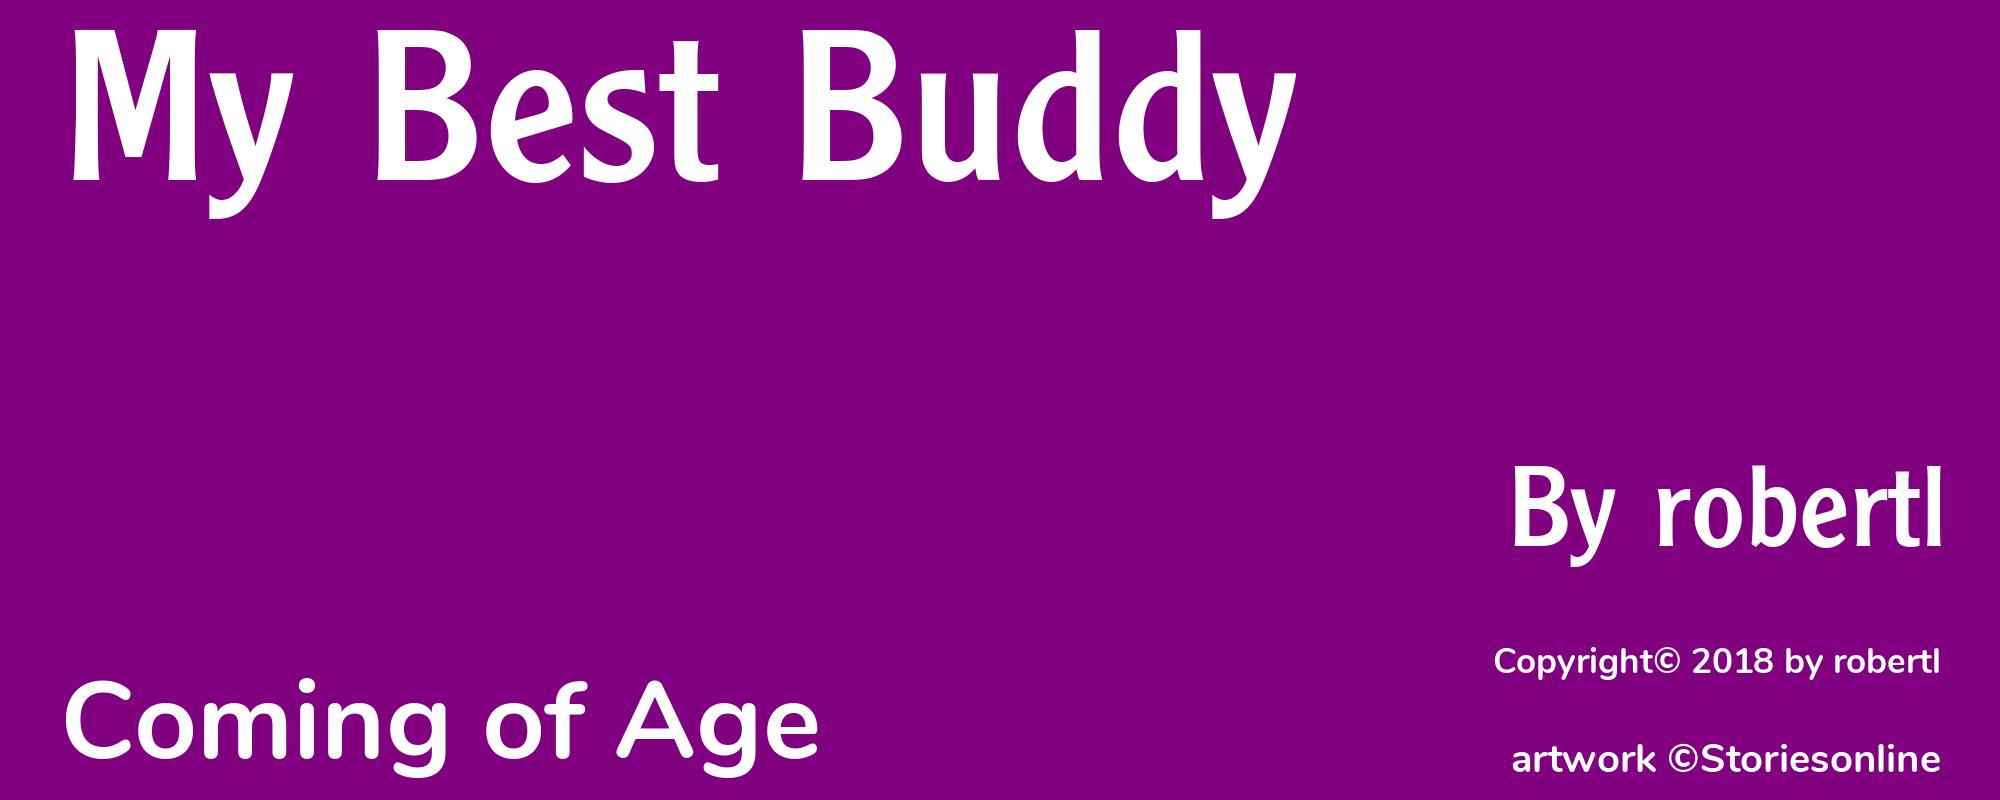 My Best Buddy - Cover